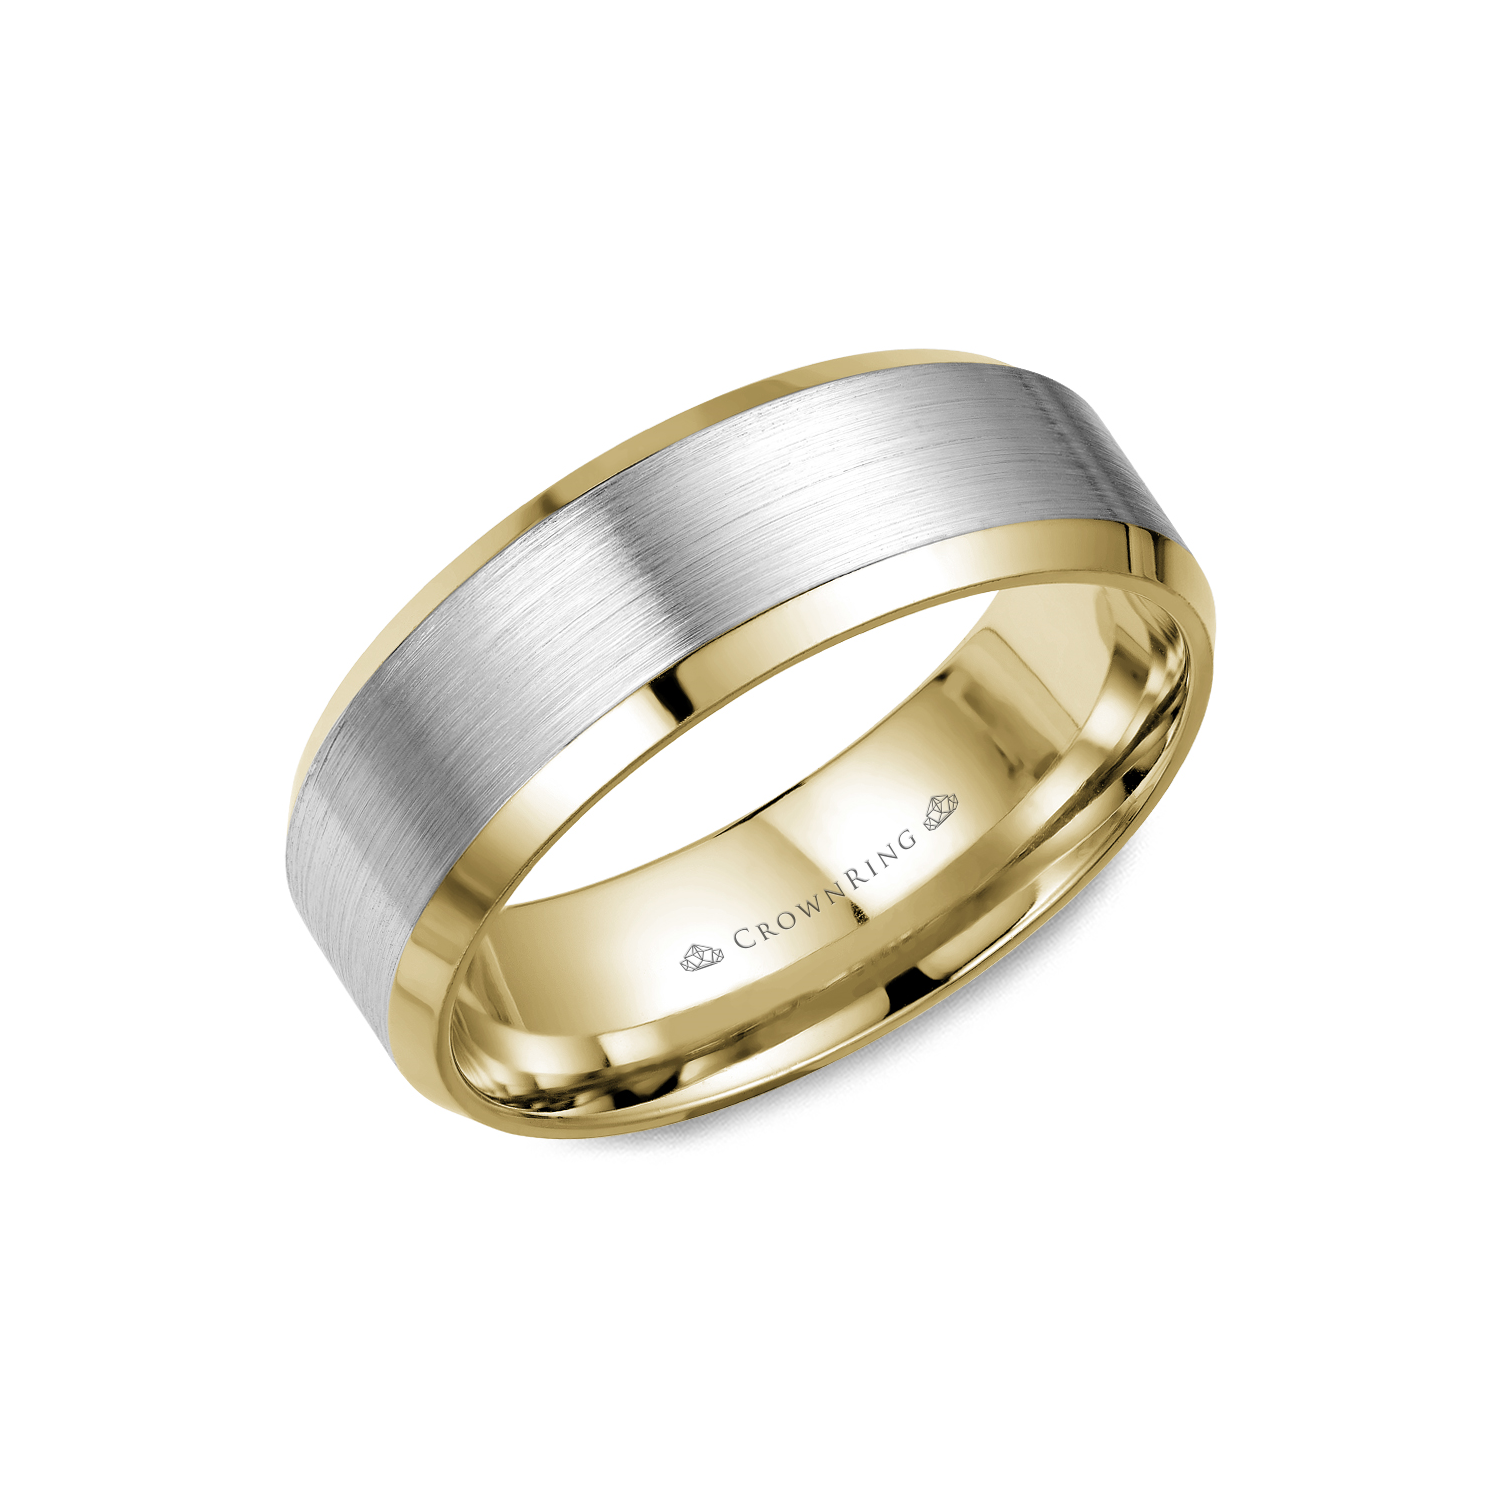 8mm Classic Wedding Band With Satin Finish